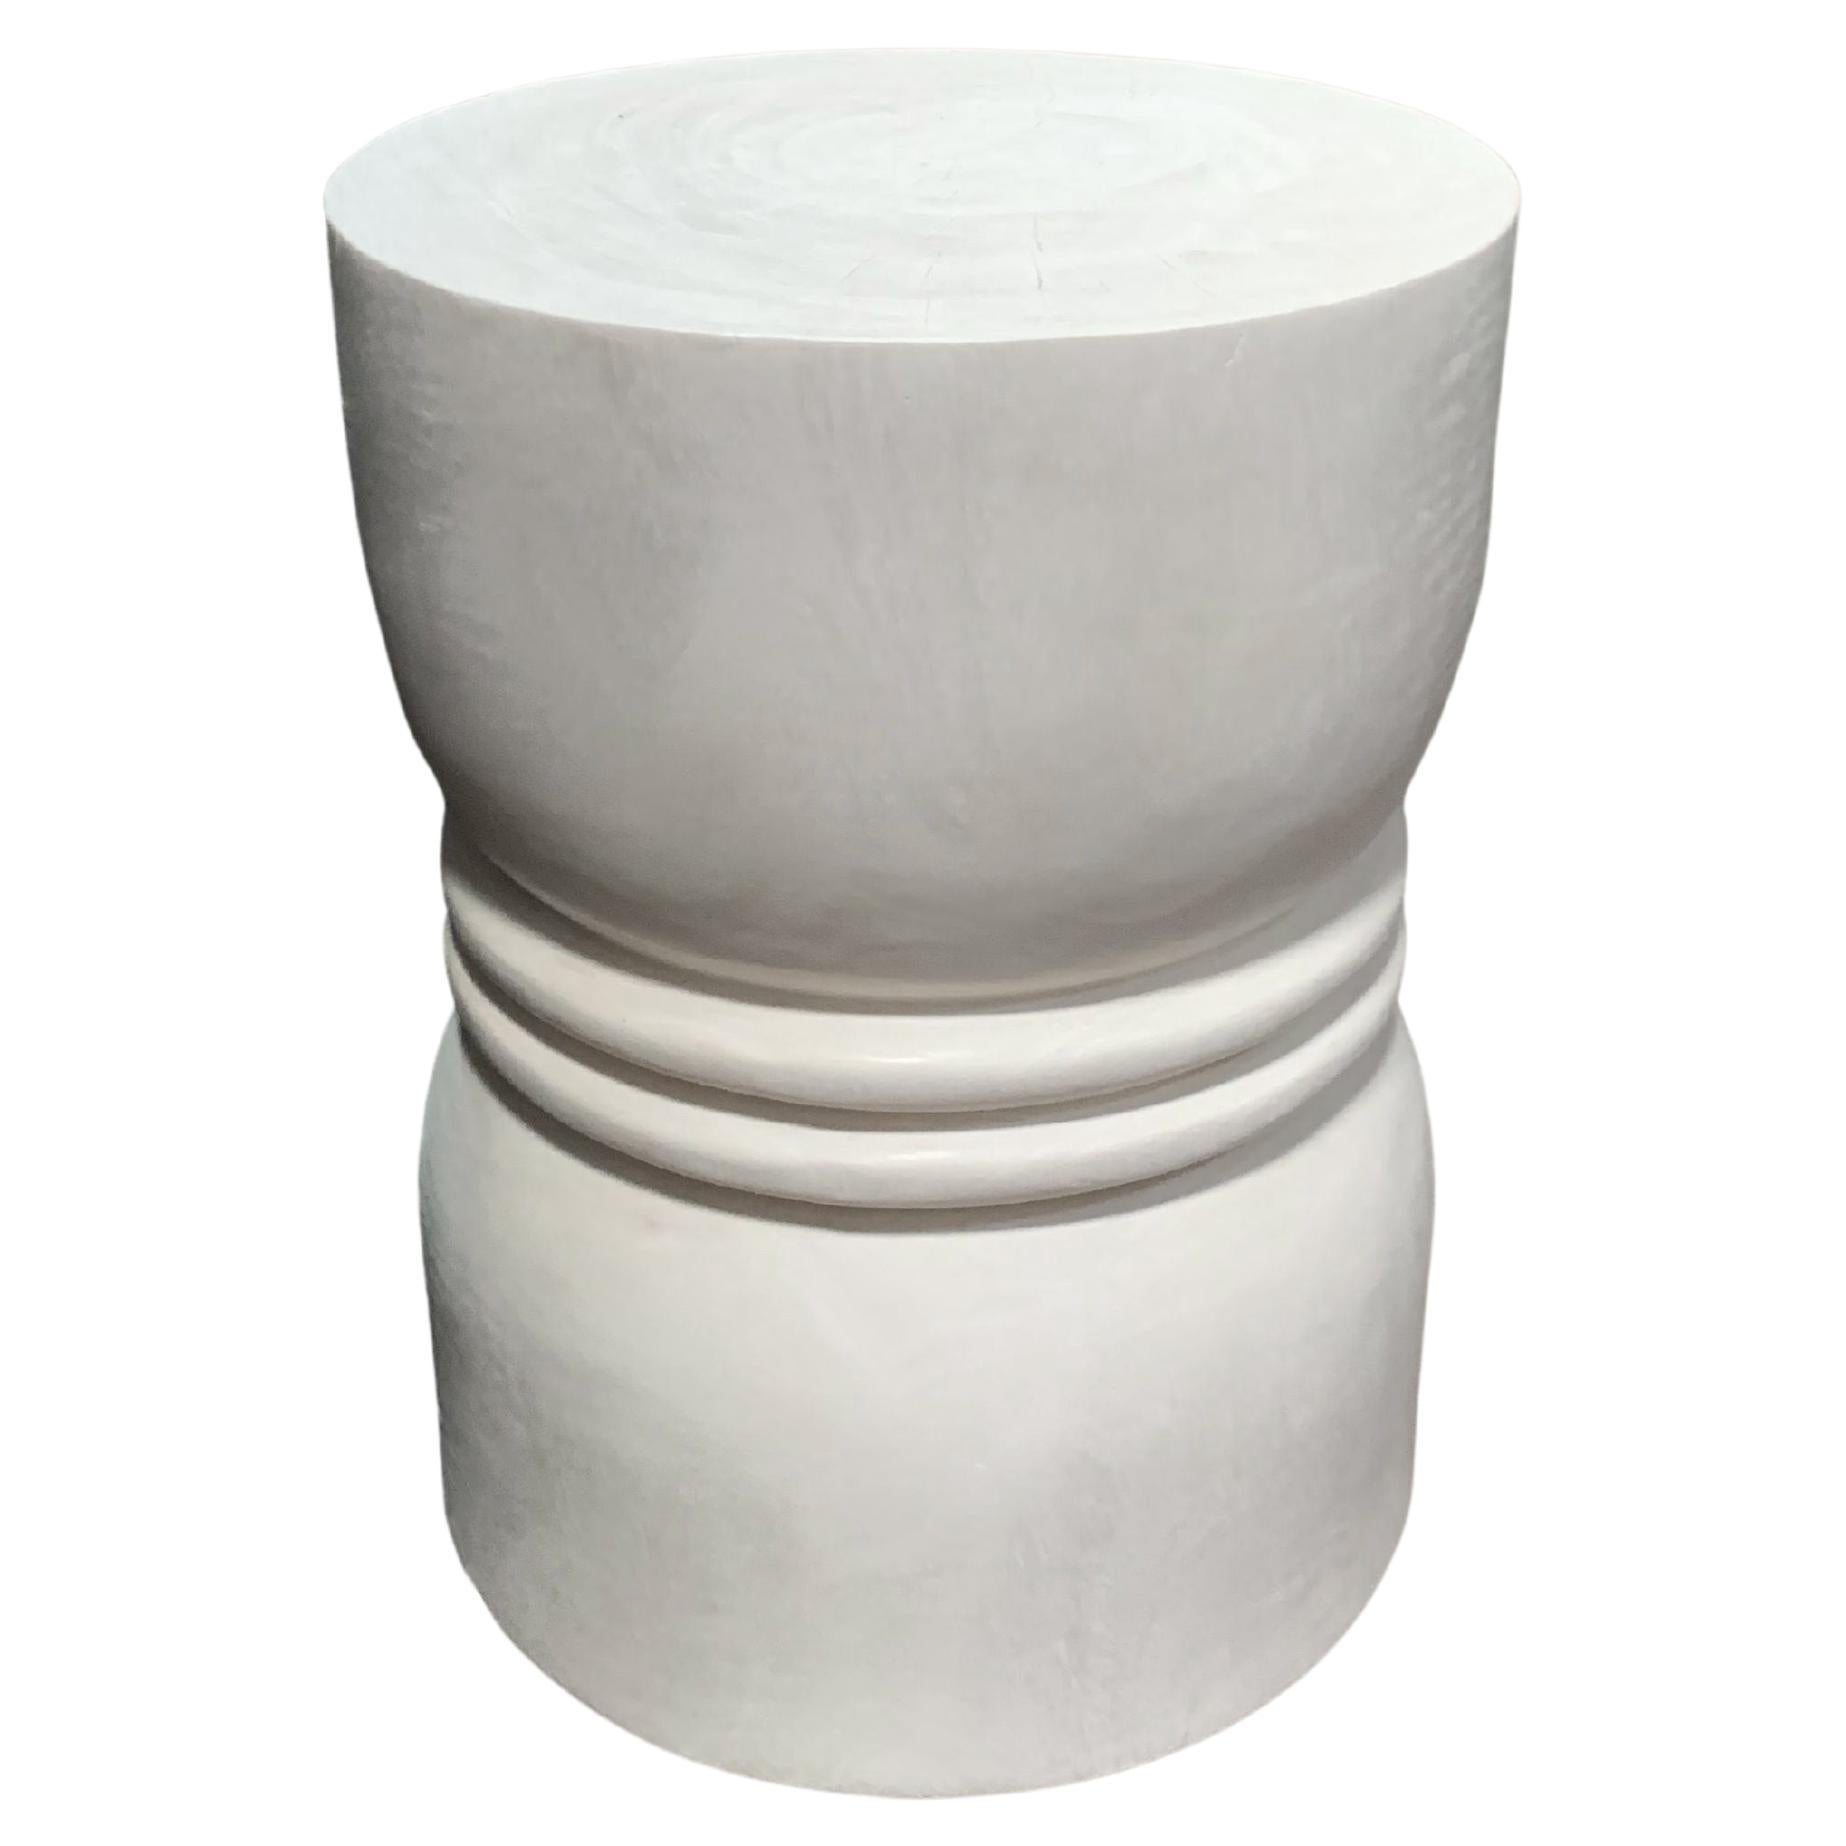 Sculptural Side Table Crafted from Mango Wood, White Finish